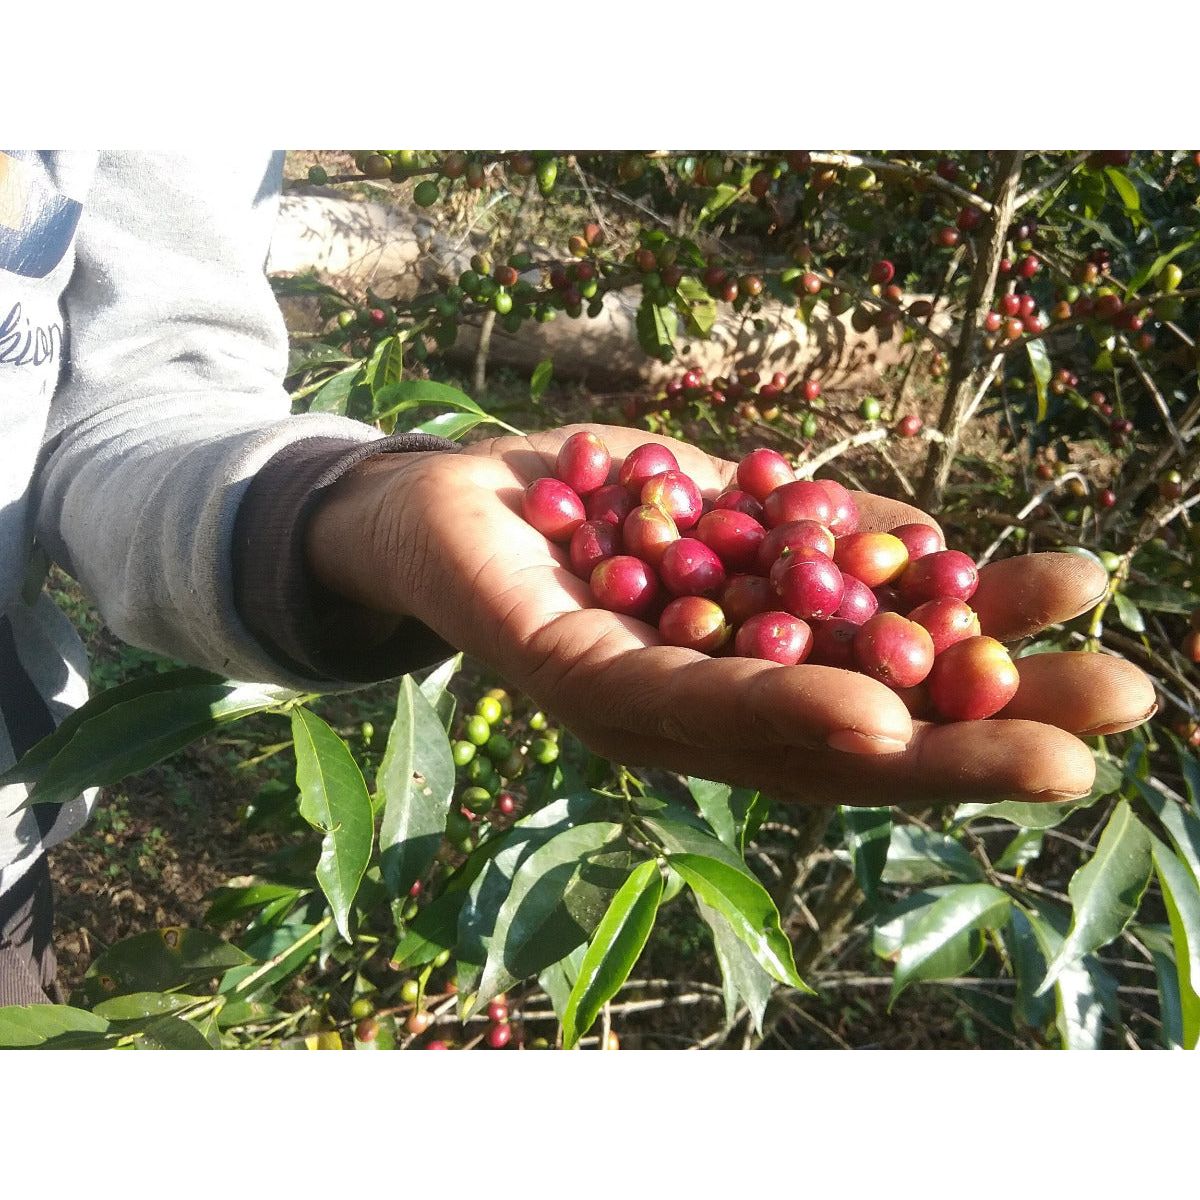 abba-olly-ethiopia-specialty-coffee-picked-coffee